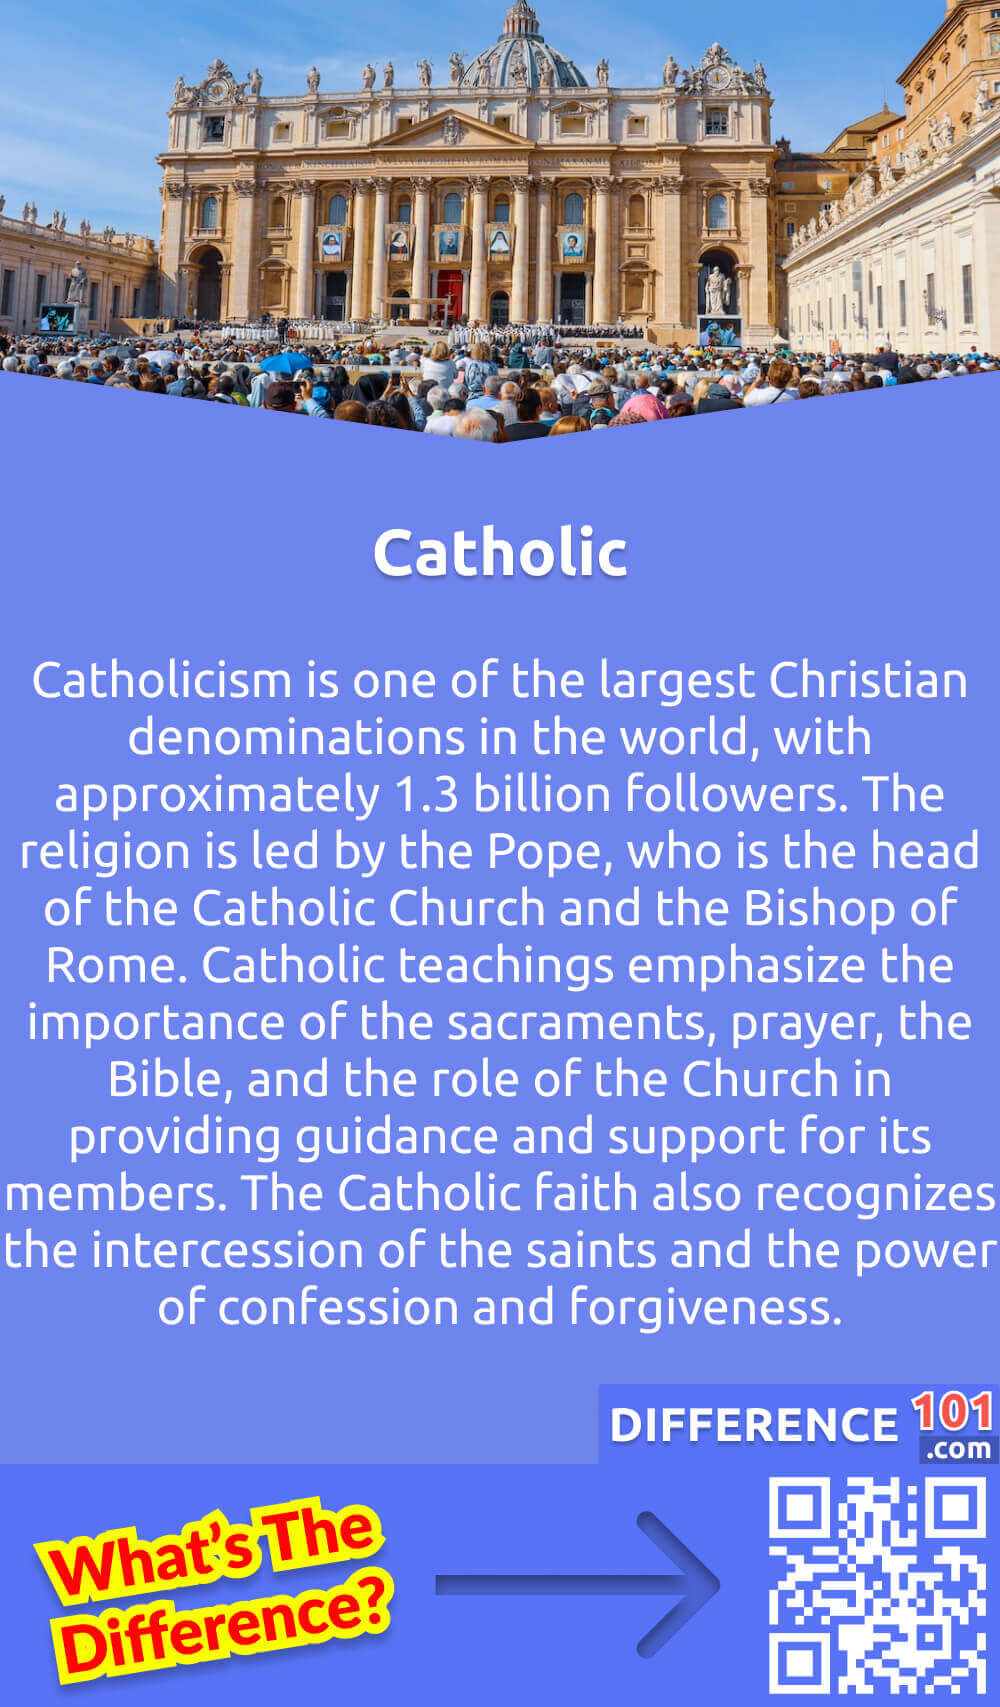 What Is Catholic? Catholicism is one of the largest Christian denominations in the world, with approximately 1.3 billion followers. The religion is led by the Pope, who is the head of the Catholic Church and the Bishop of Rome. Catholic teachings emphasize the importance of the sacraments, prayer, the Bible, and the role of the Church in providing guidance and support for its members. The Catholic faith also recognizes the intercession of the saints and the power of confession and forgiveness. The Church has a rich history and tradition of liturgy, art, music, and social outreach, with numerous contributions to cultural and intellectual life. Despite its global influence, the Catholic Church has faced challenges and controversies throughout history, including accusations of corruption, abuse, and theological disputes.